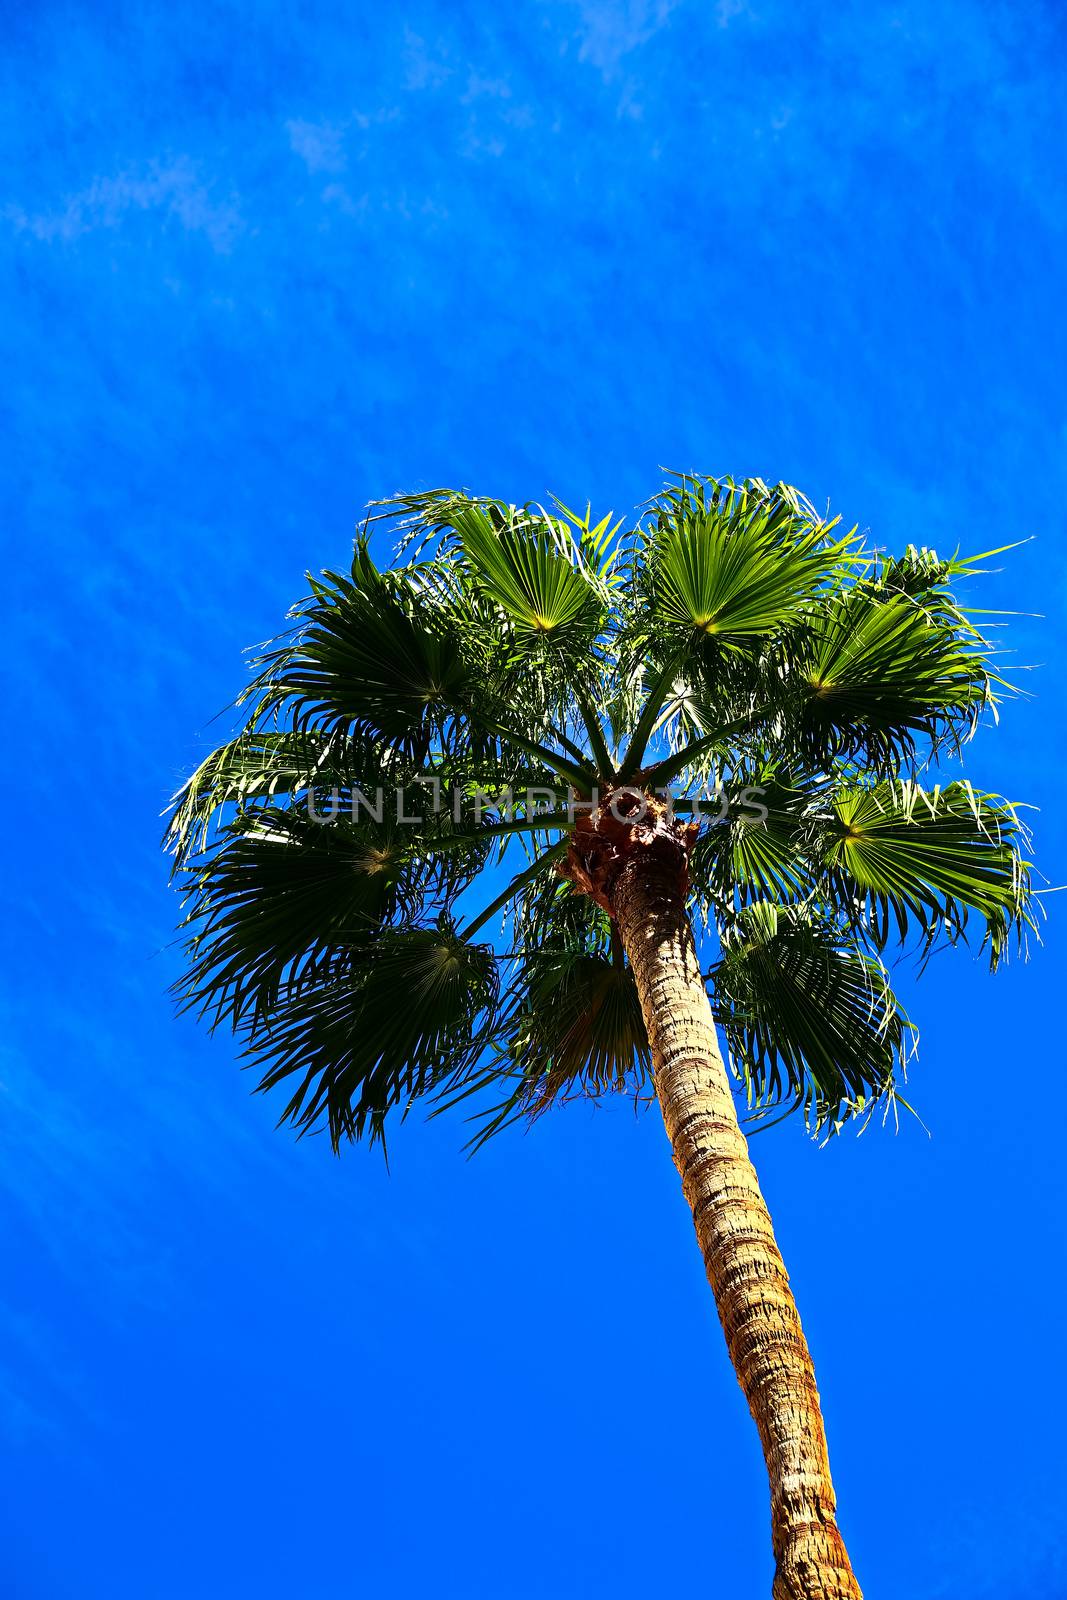 Classic Florida palm tree background of blue sky.Close up photo of a bunch of Coconut palm trees with blue sky background.